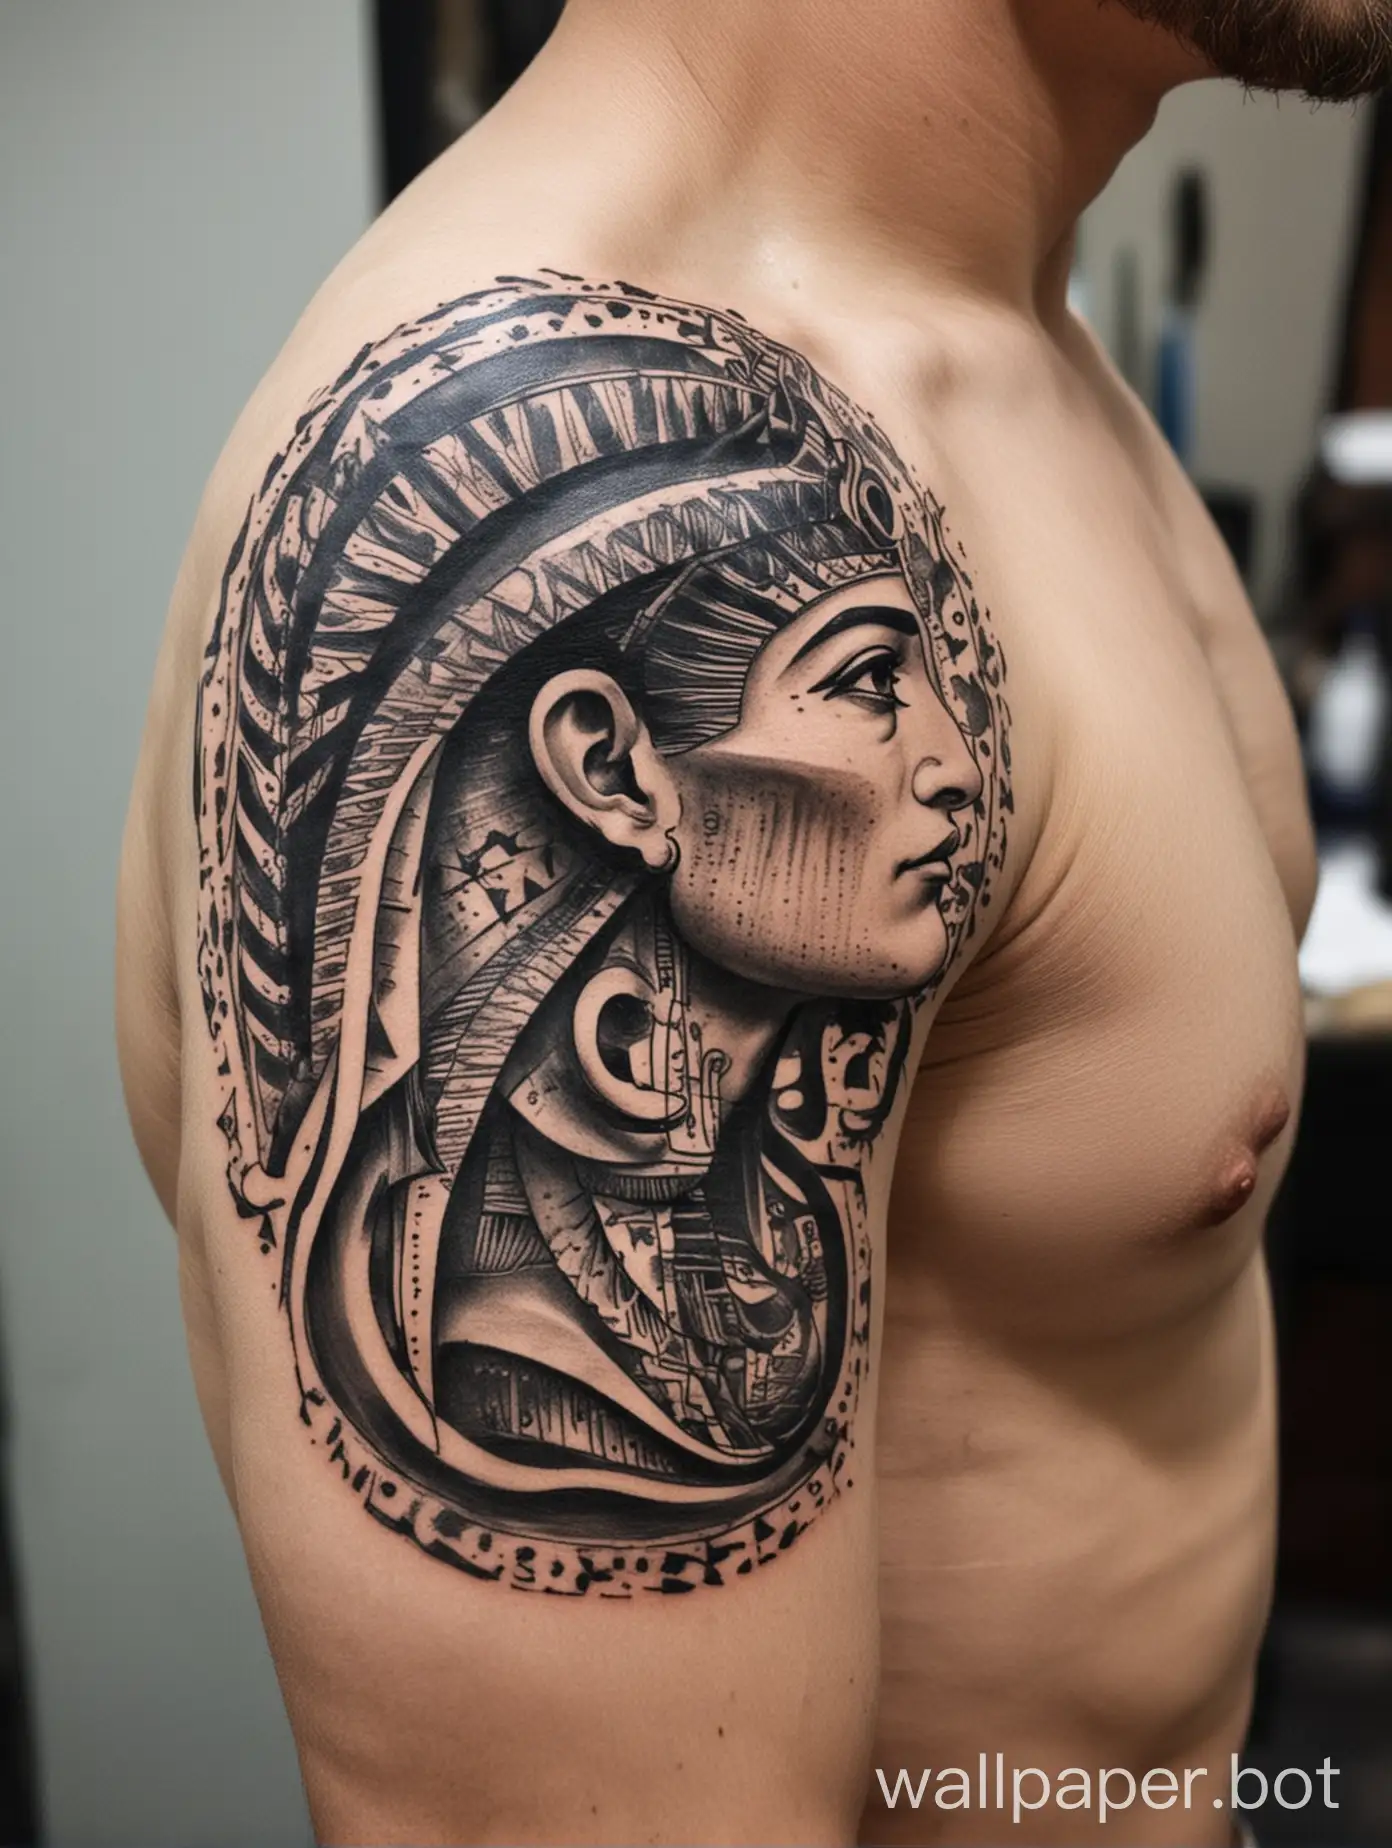 Men's Aquarius tattoo on the shoulder not colored in Egyptian style